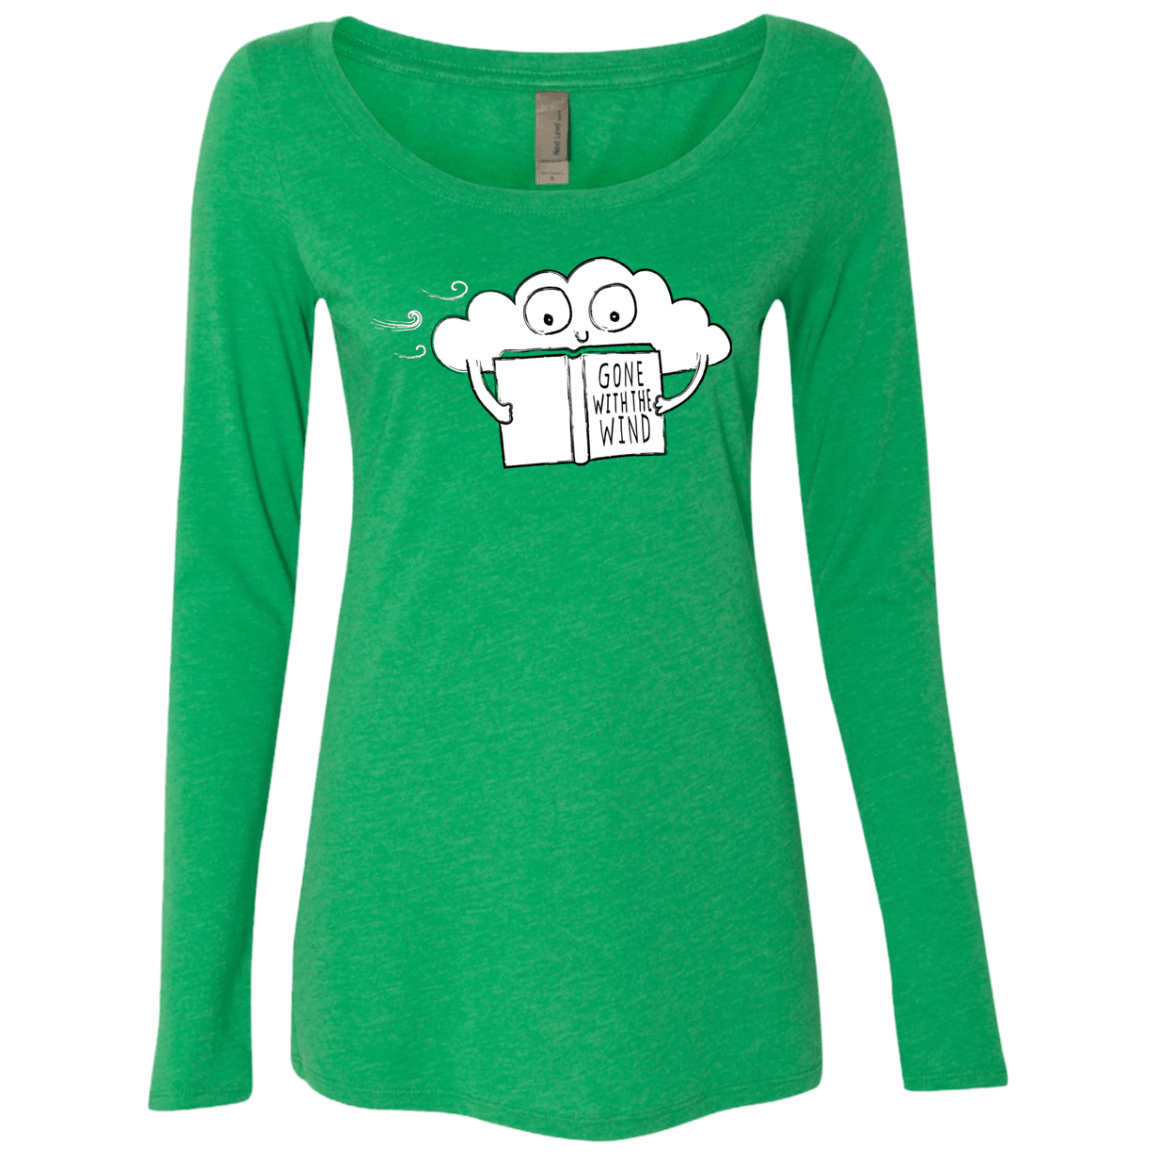 T-Shirts Envy / S Gone with the Wind Women's Triblend Long Sleeve Shirt